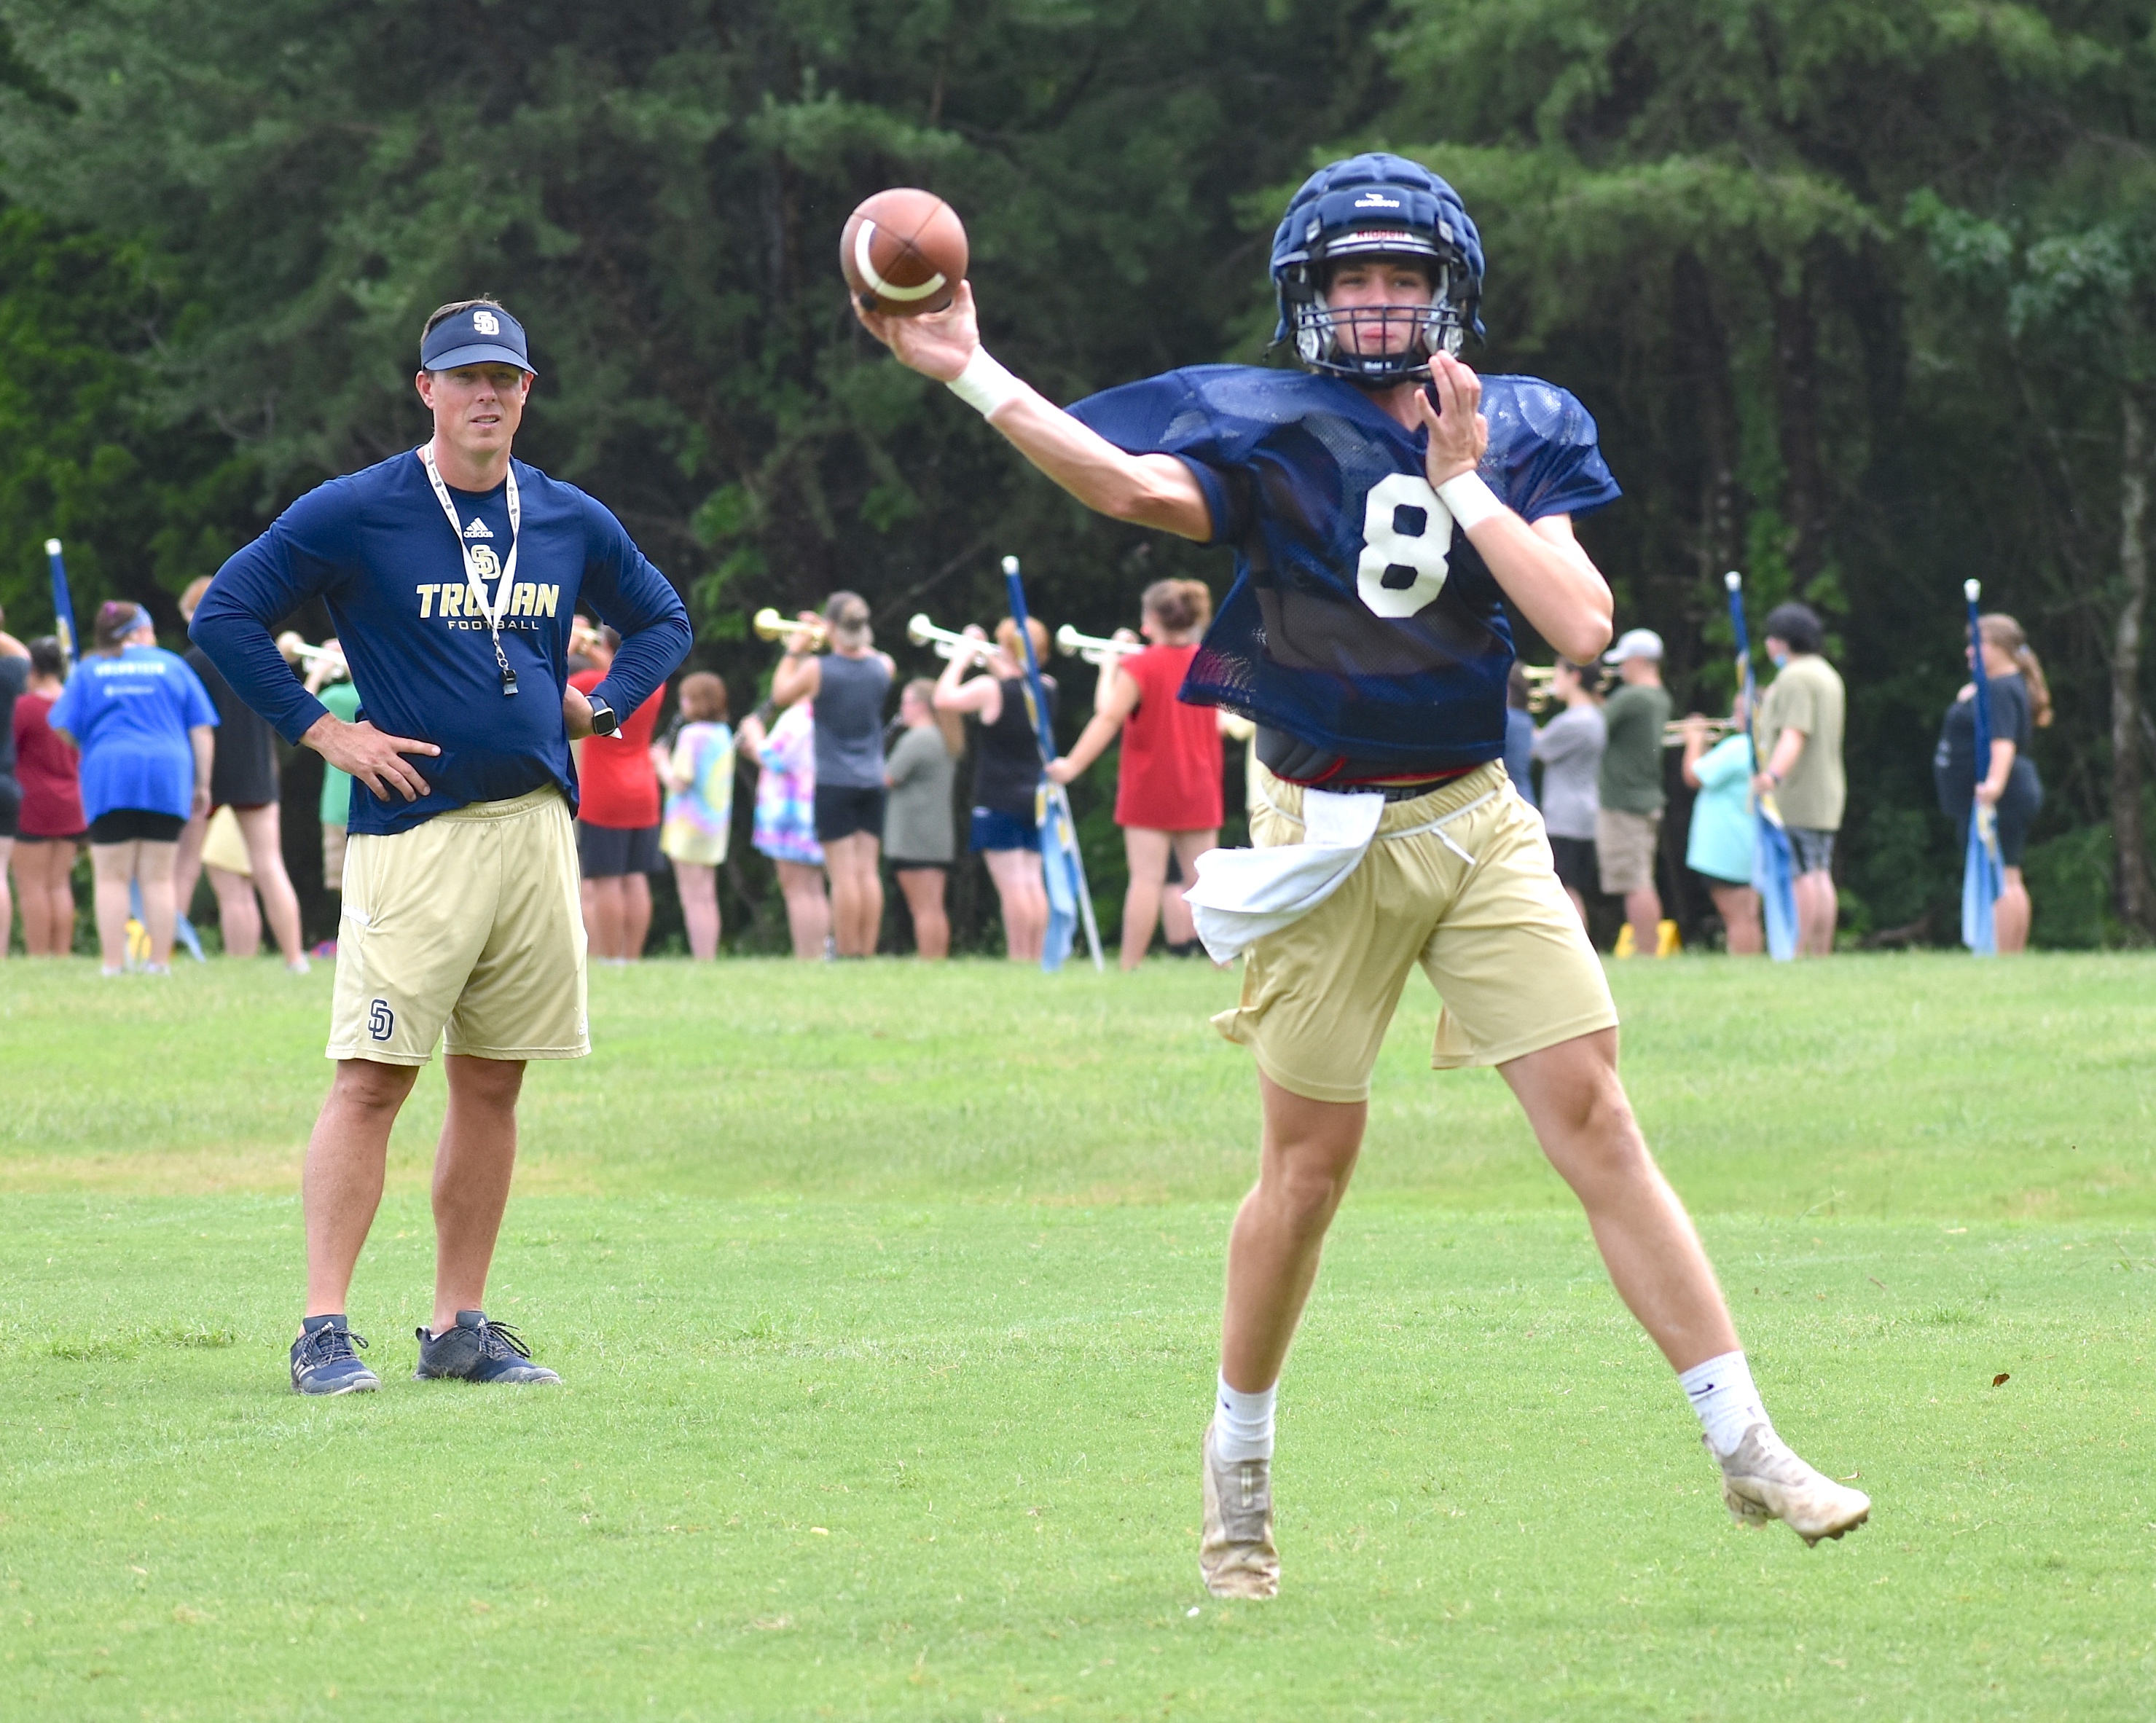 Soddy-Daisy quarterback earns Player of the Week honors